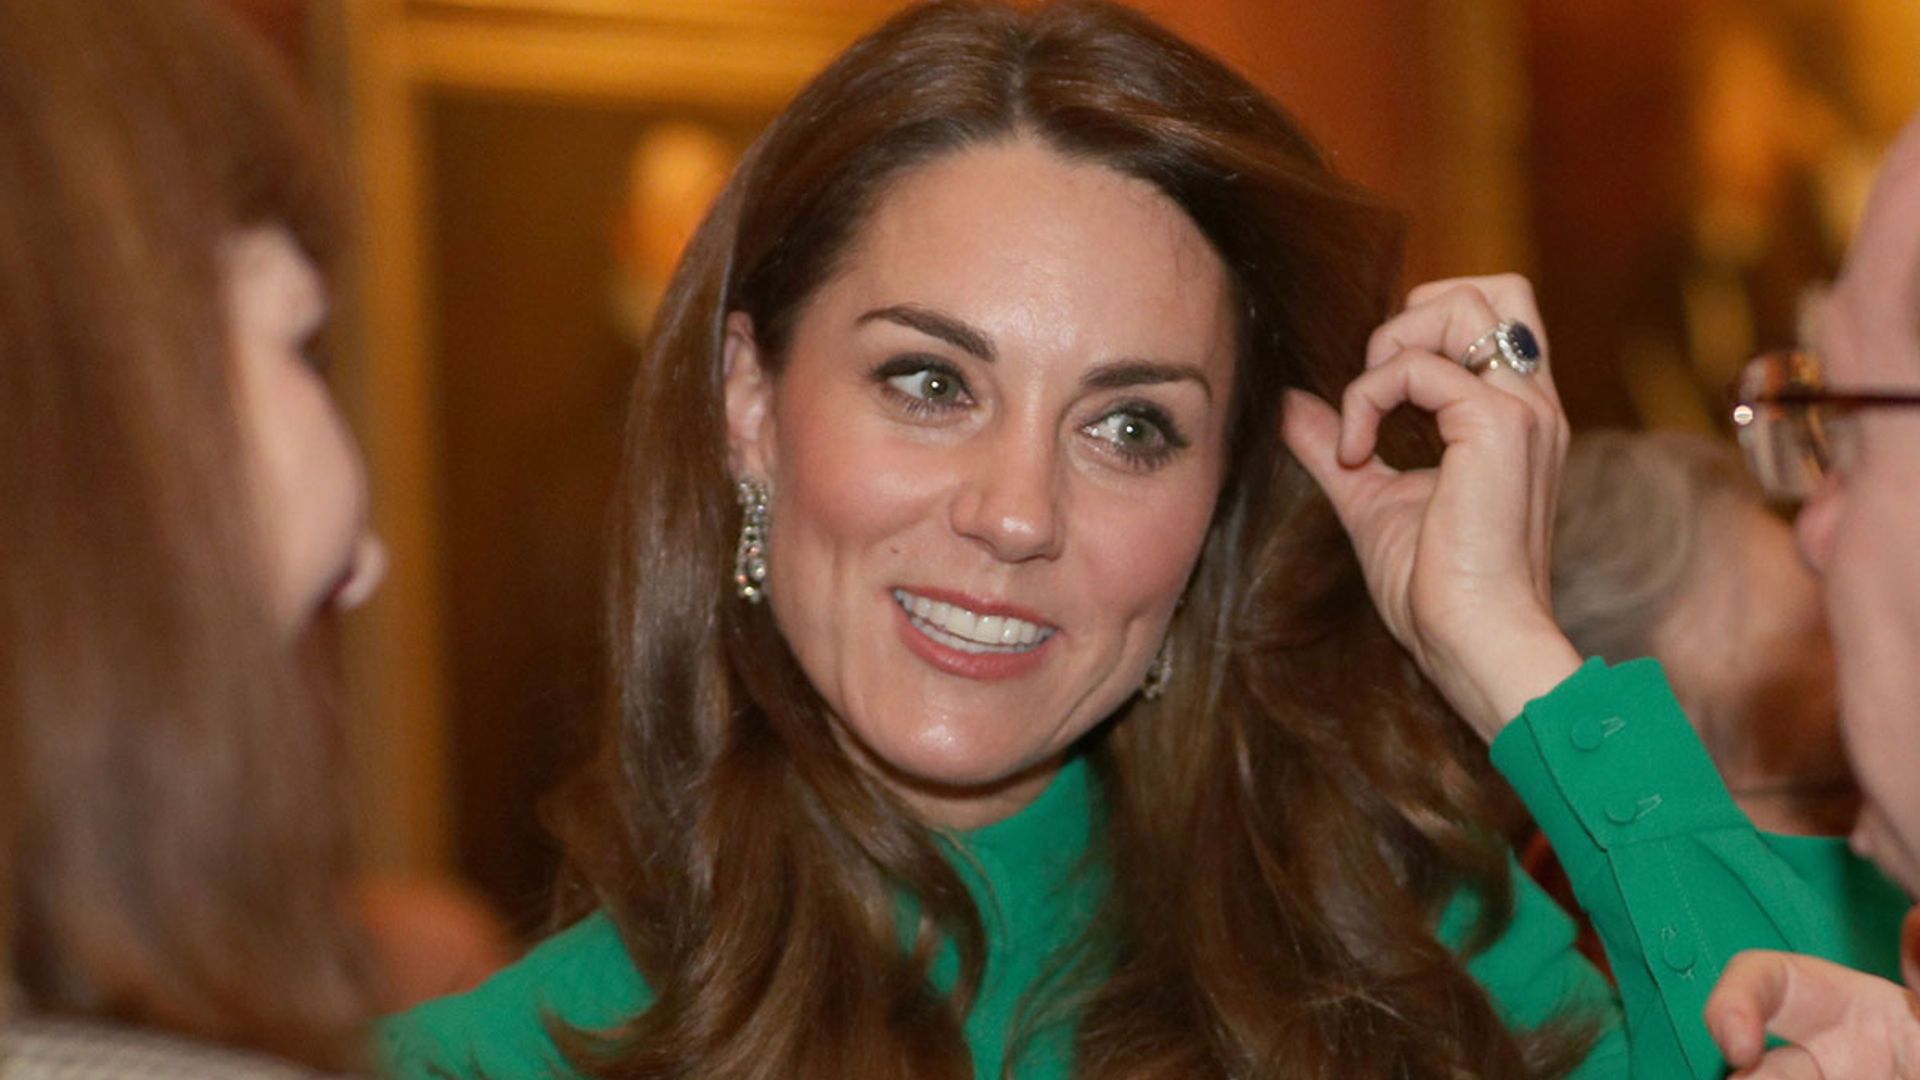 Duchess Kate calls on parents to focus on 'real meaning' of Christmas